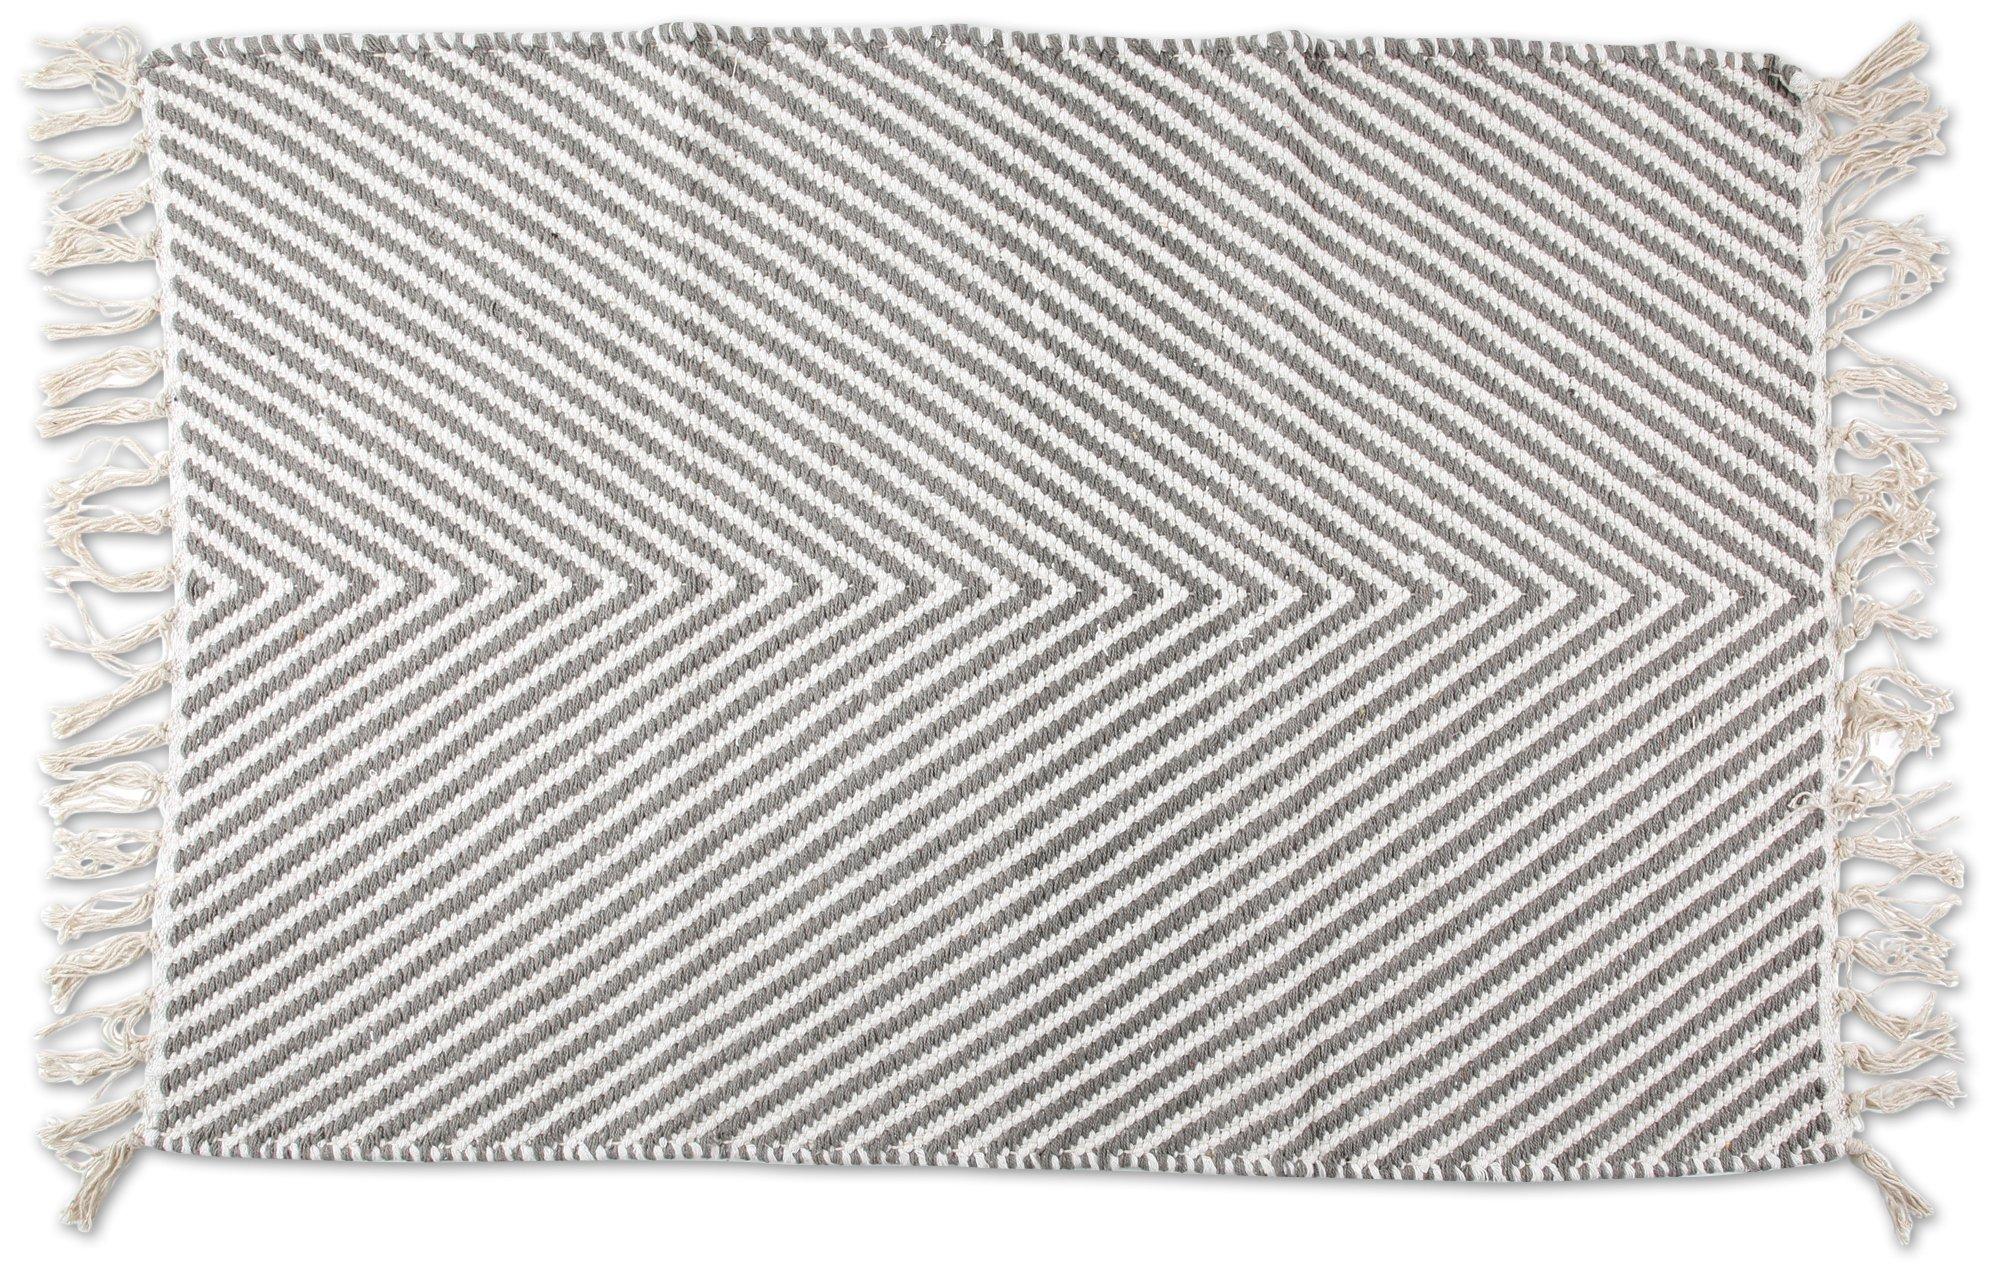 27x45 Striped Accent Rug - Grey/White